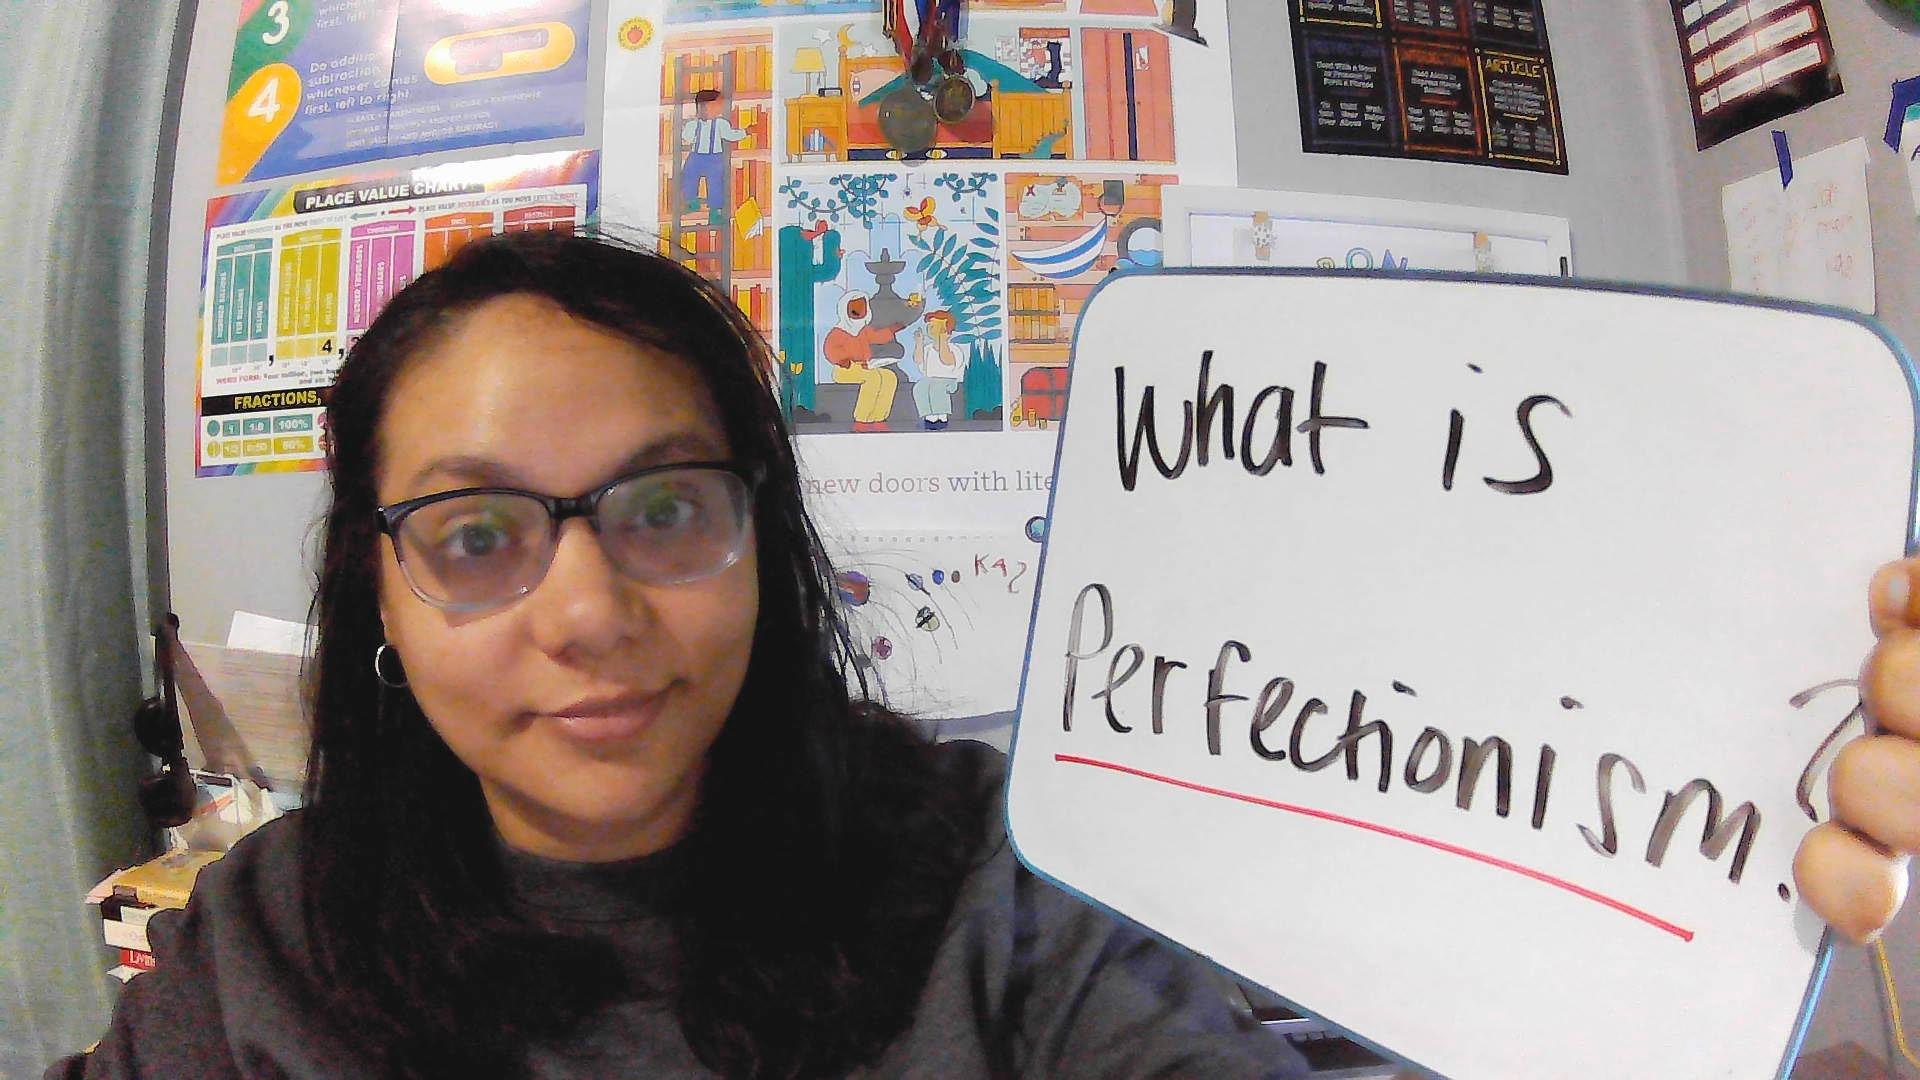 Have you heard of Perfectionism?